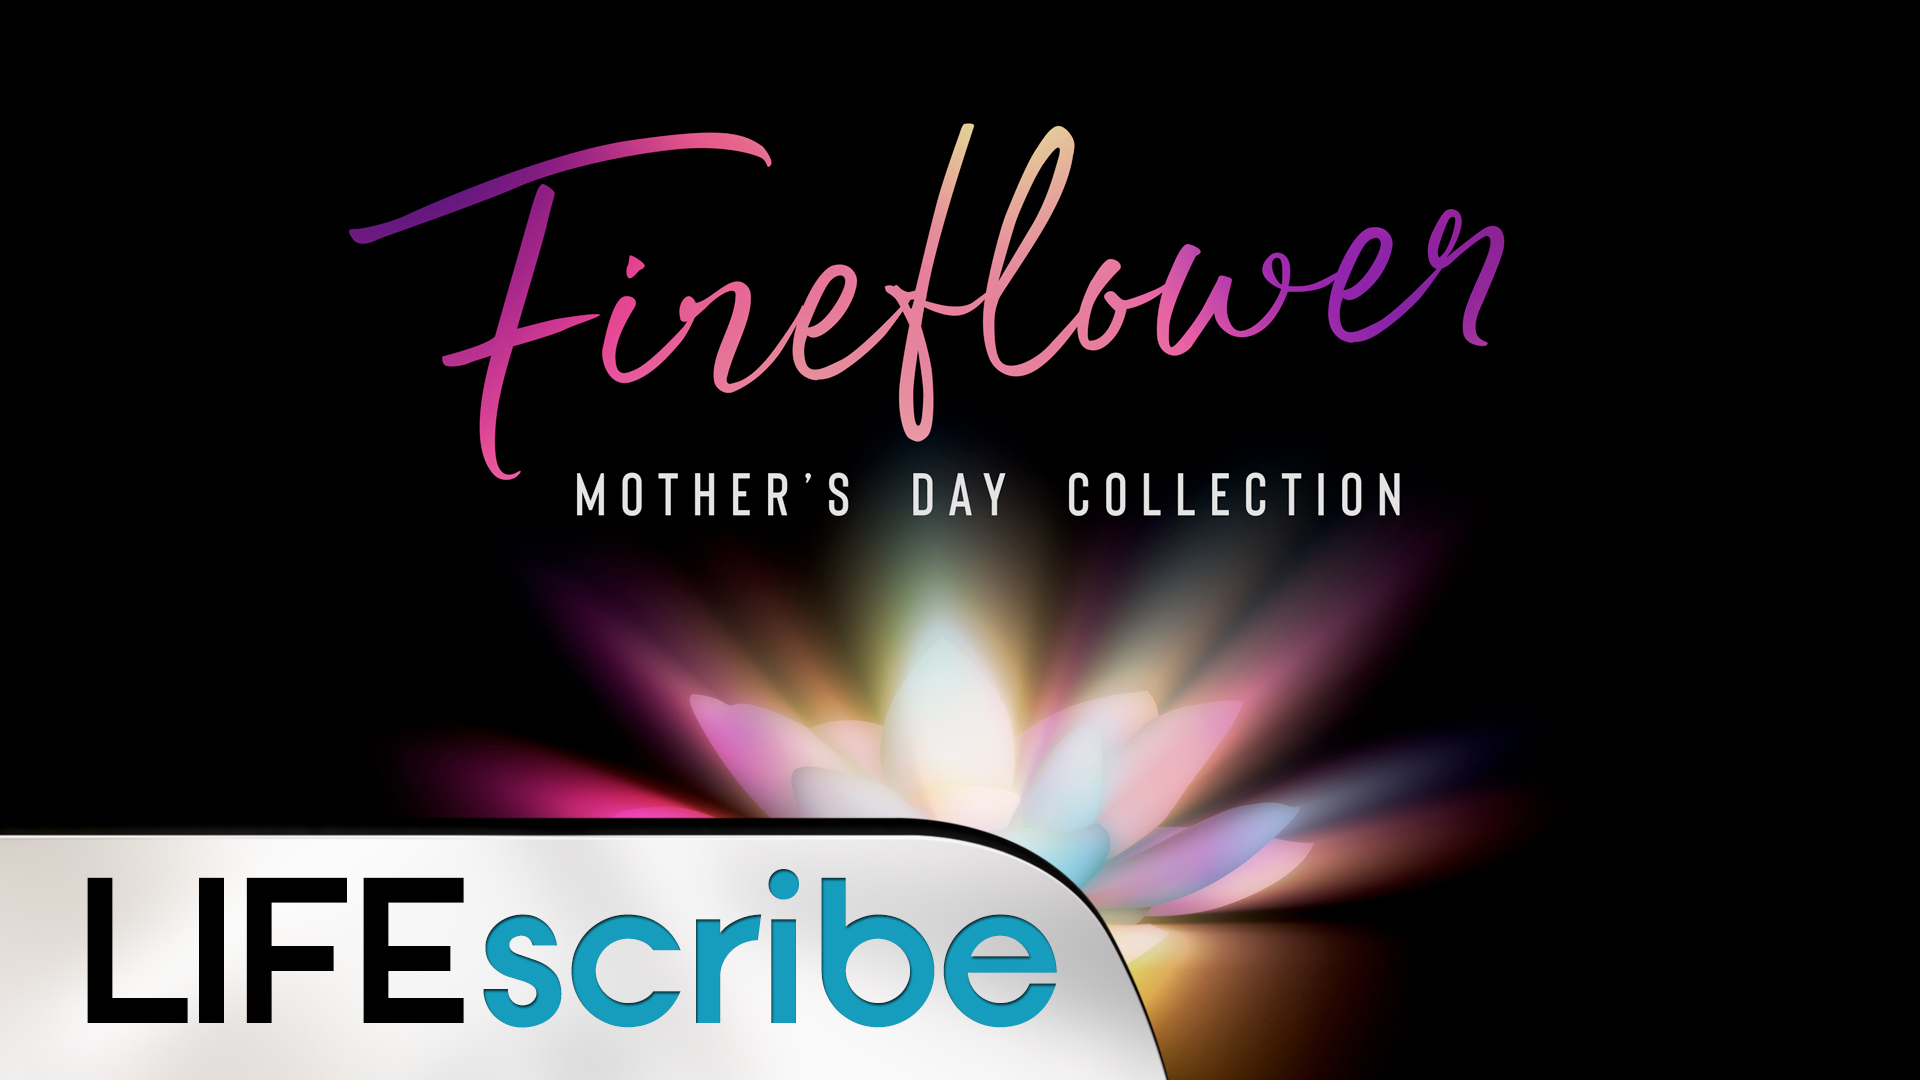 Fireflower Mother's Day Collection